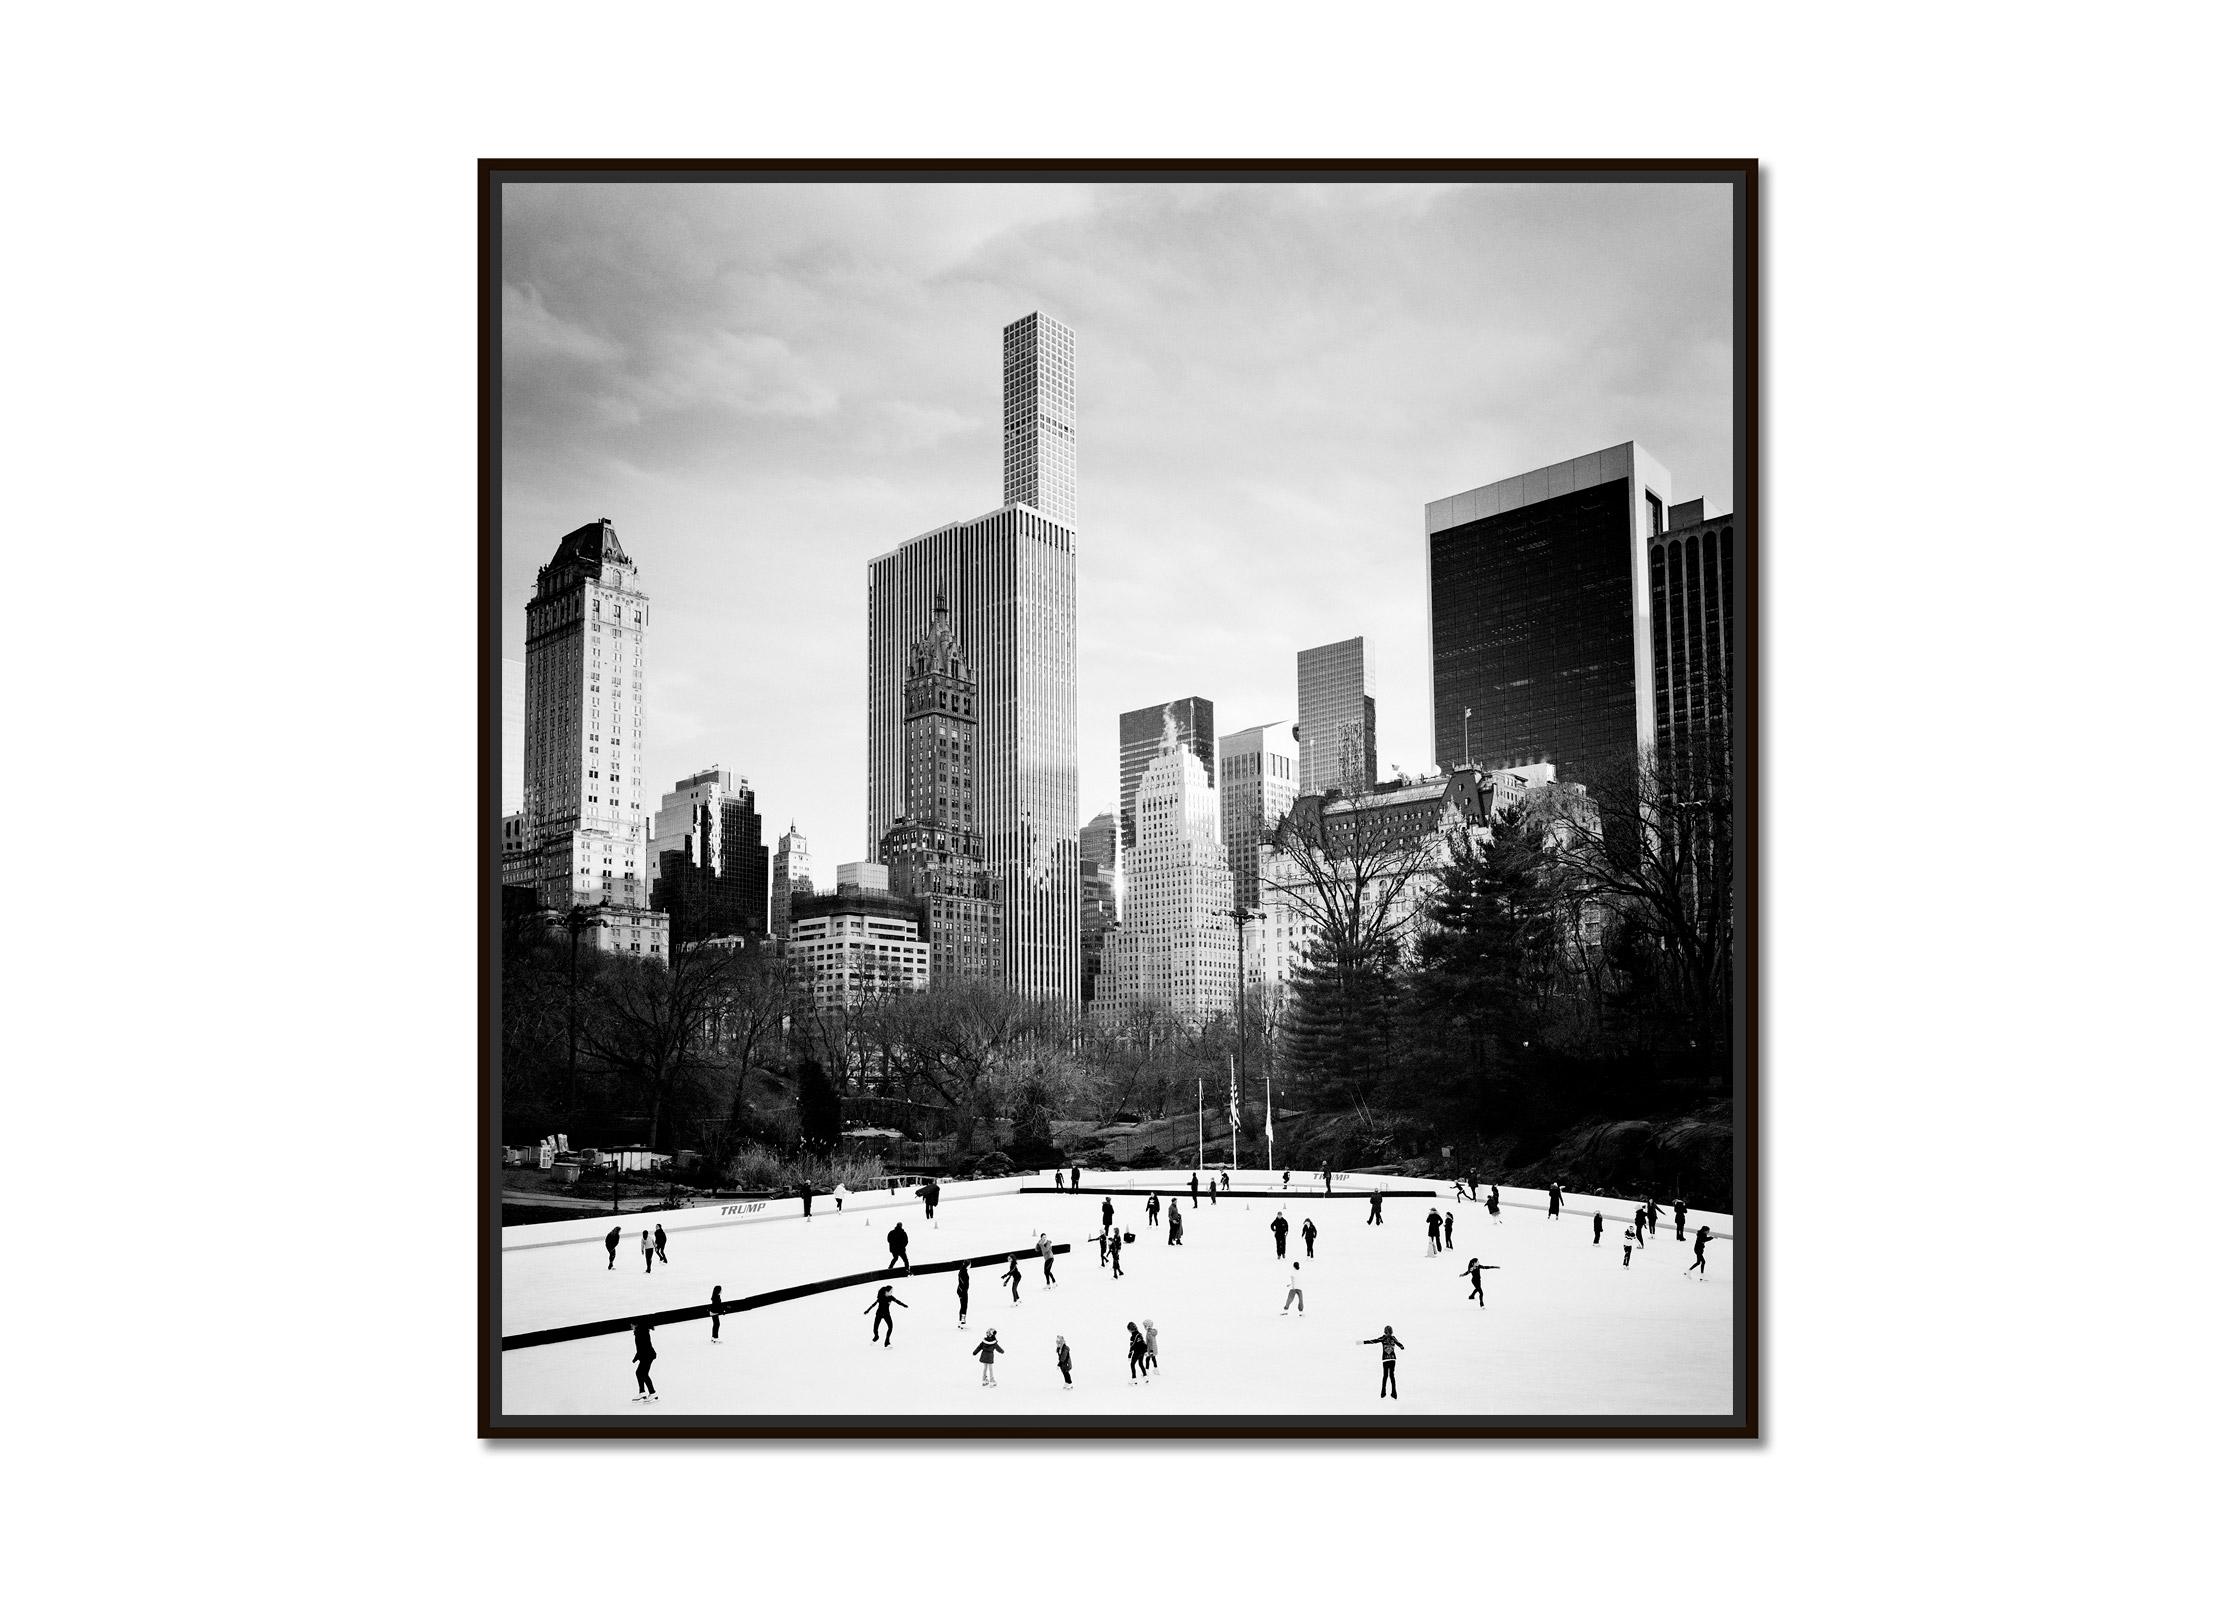 Dancing on Ice, skyscraper, New York, USA, black and white photography landscape - Photograph by Gerald Berghammer